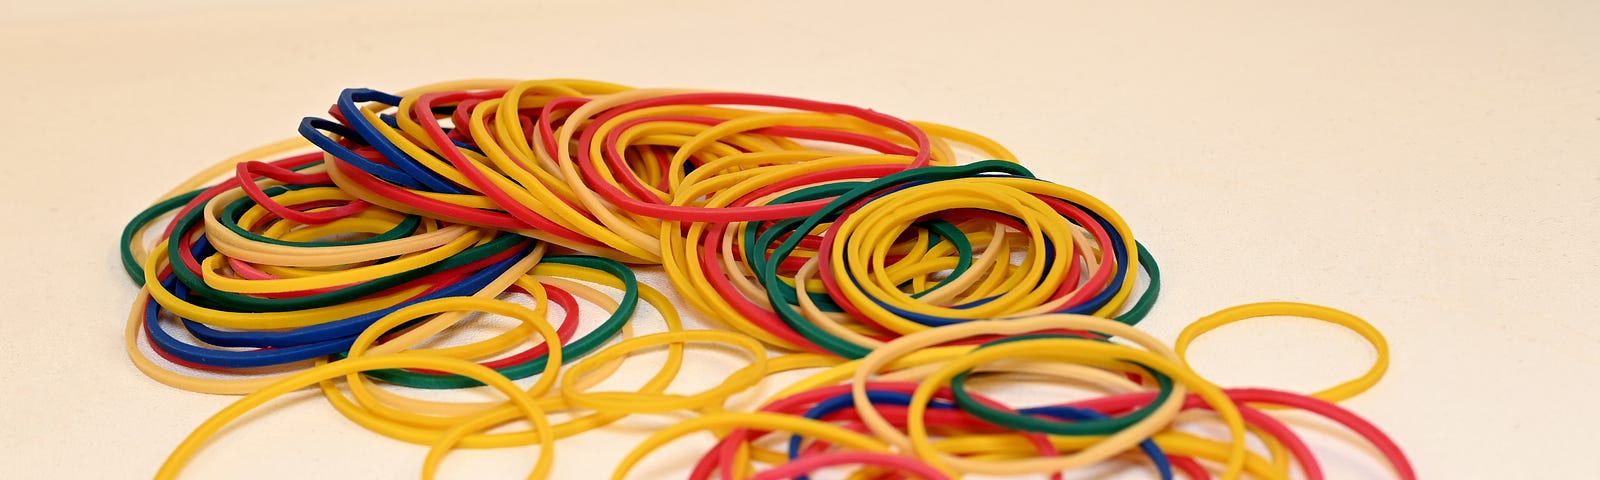 A pile of elastic bands on a white background